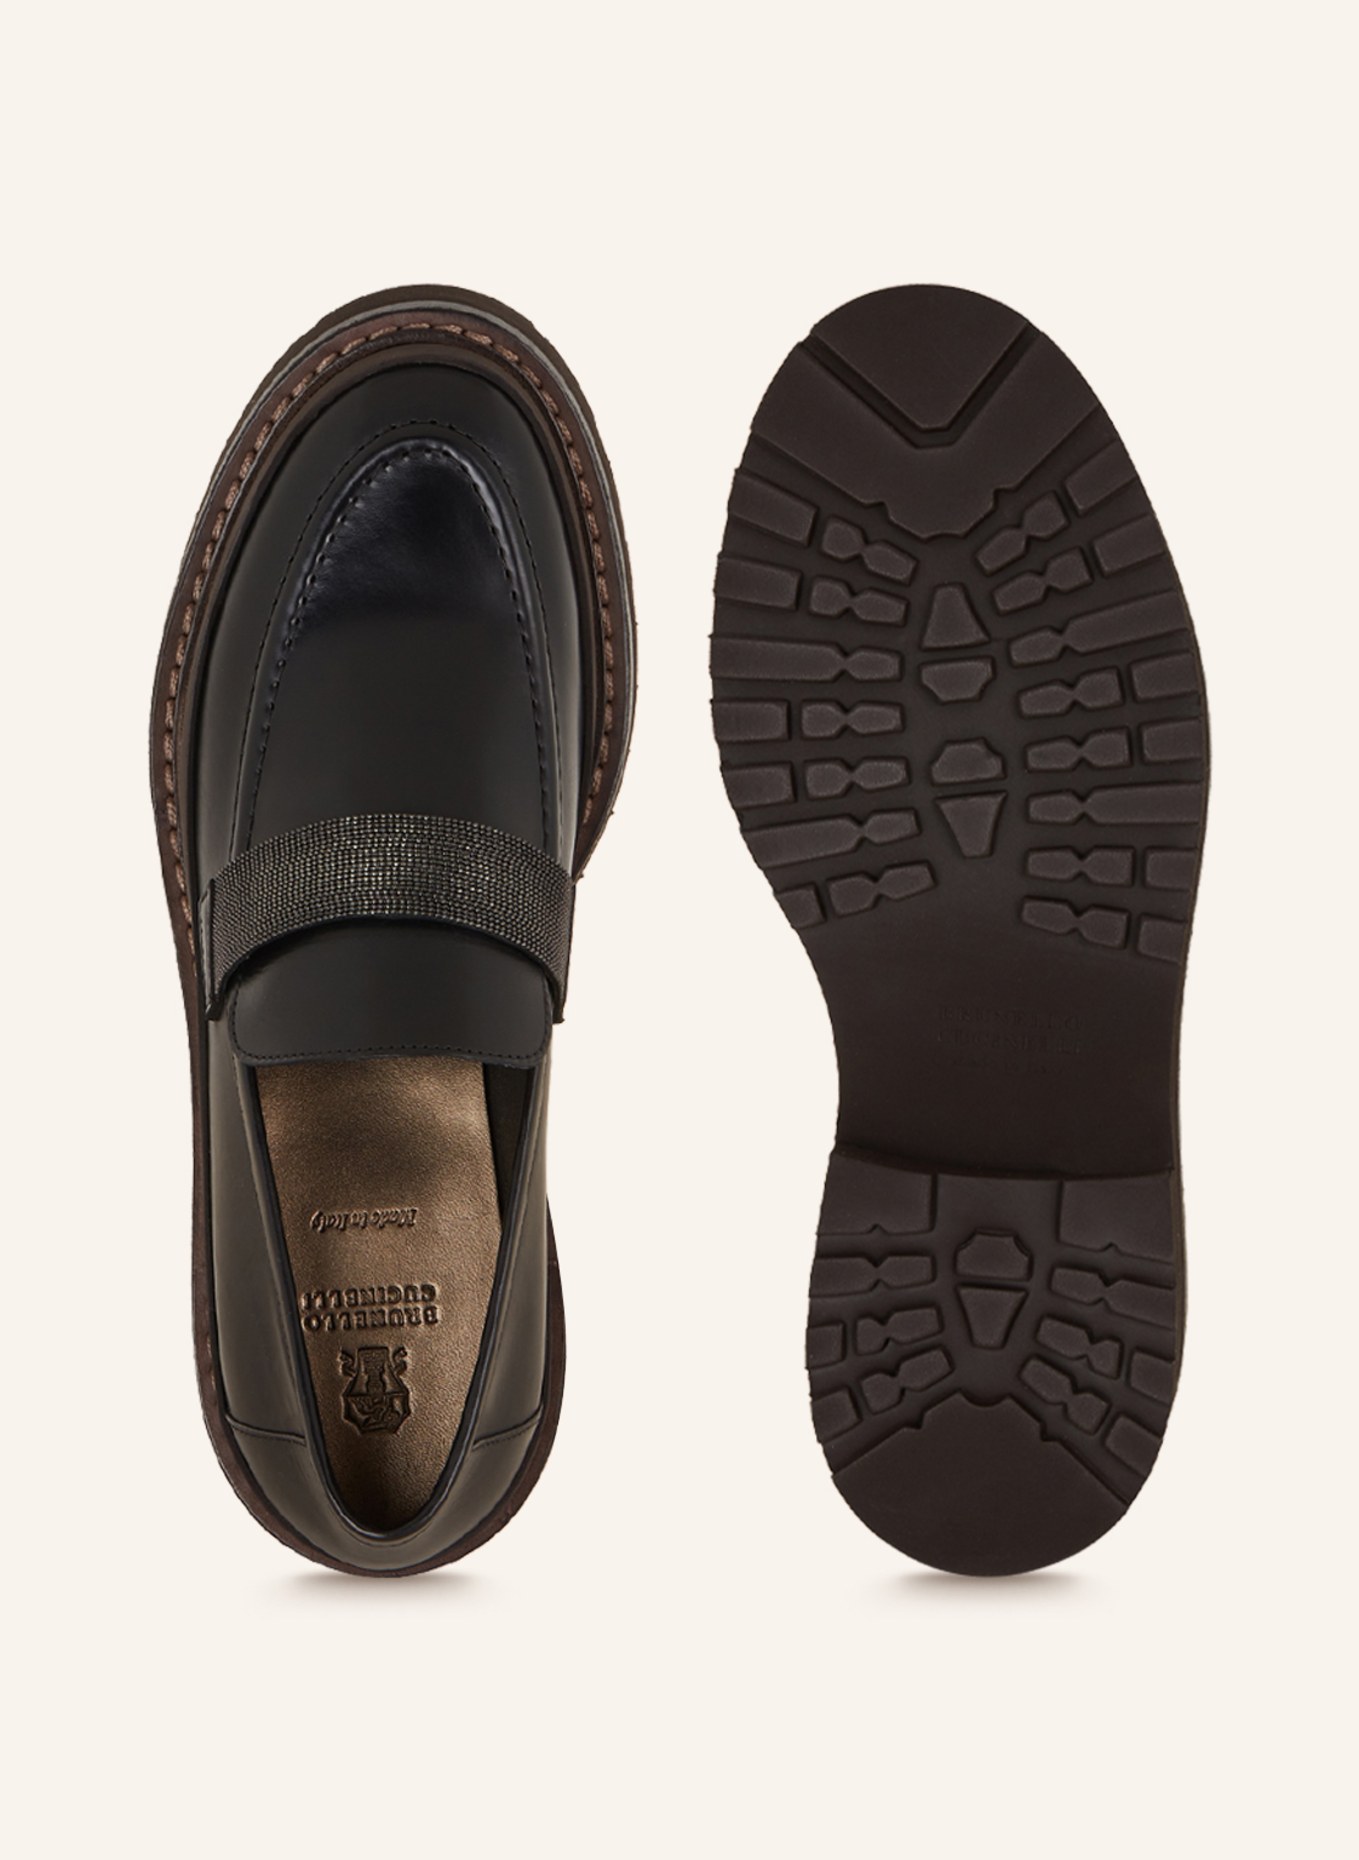 BRUNELLO CUCINELLI Penny loafers with decorative gems, Color: BLACK (Image 5)